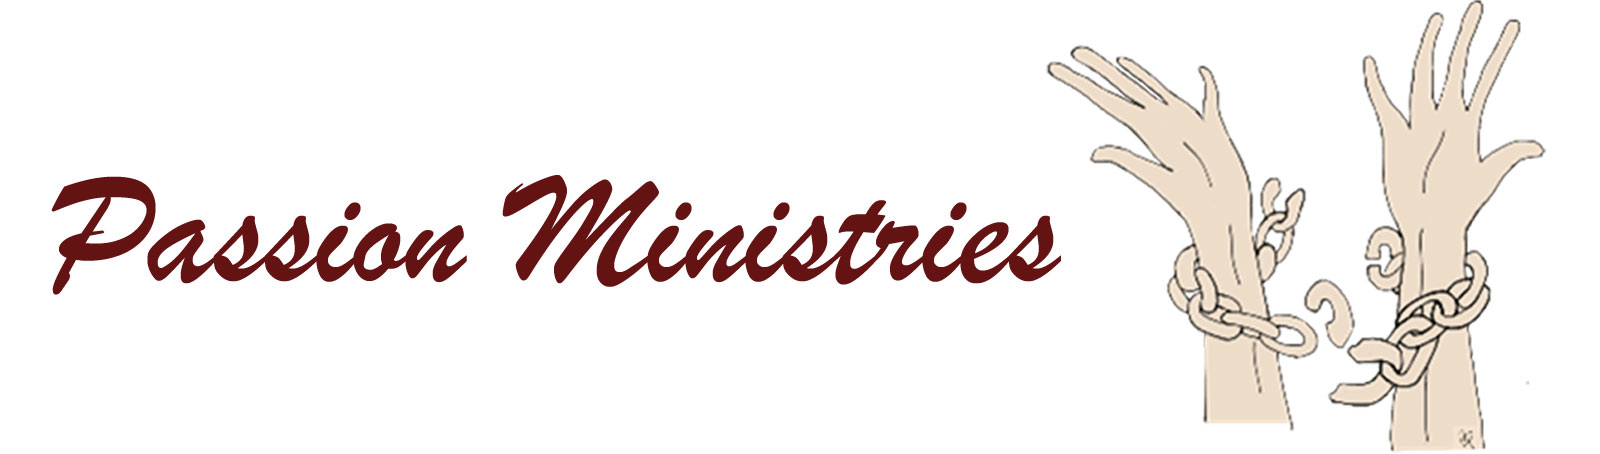 Passion Ministries